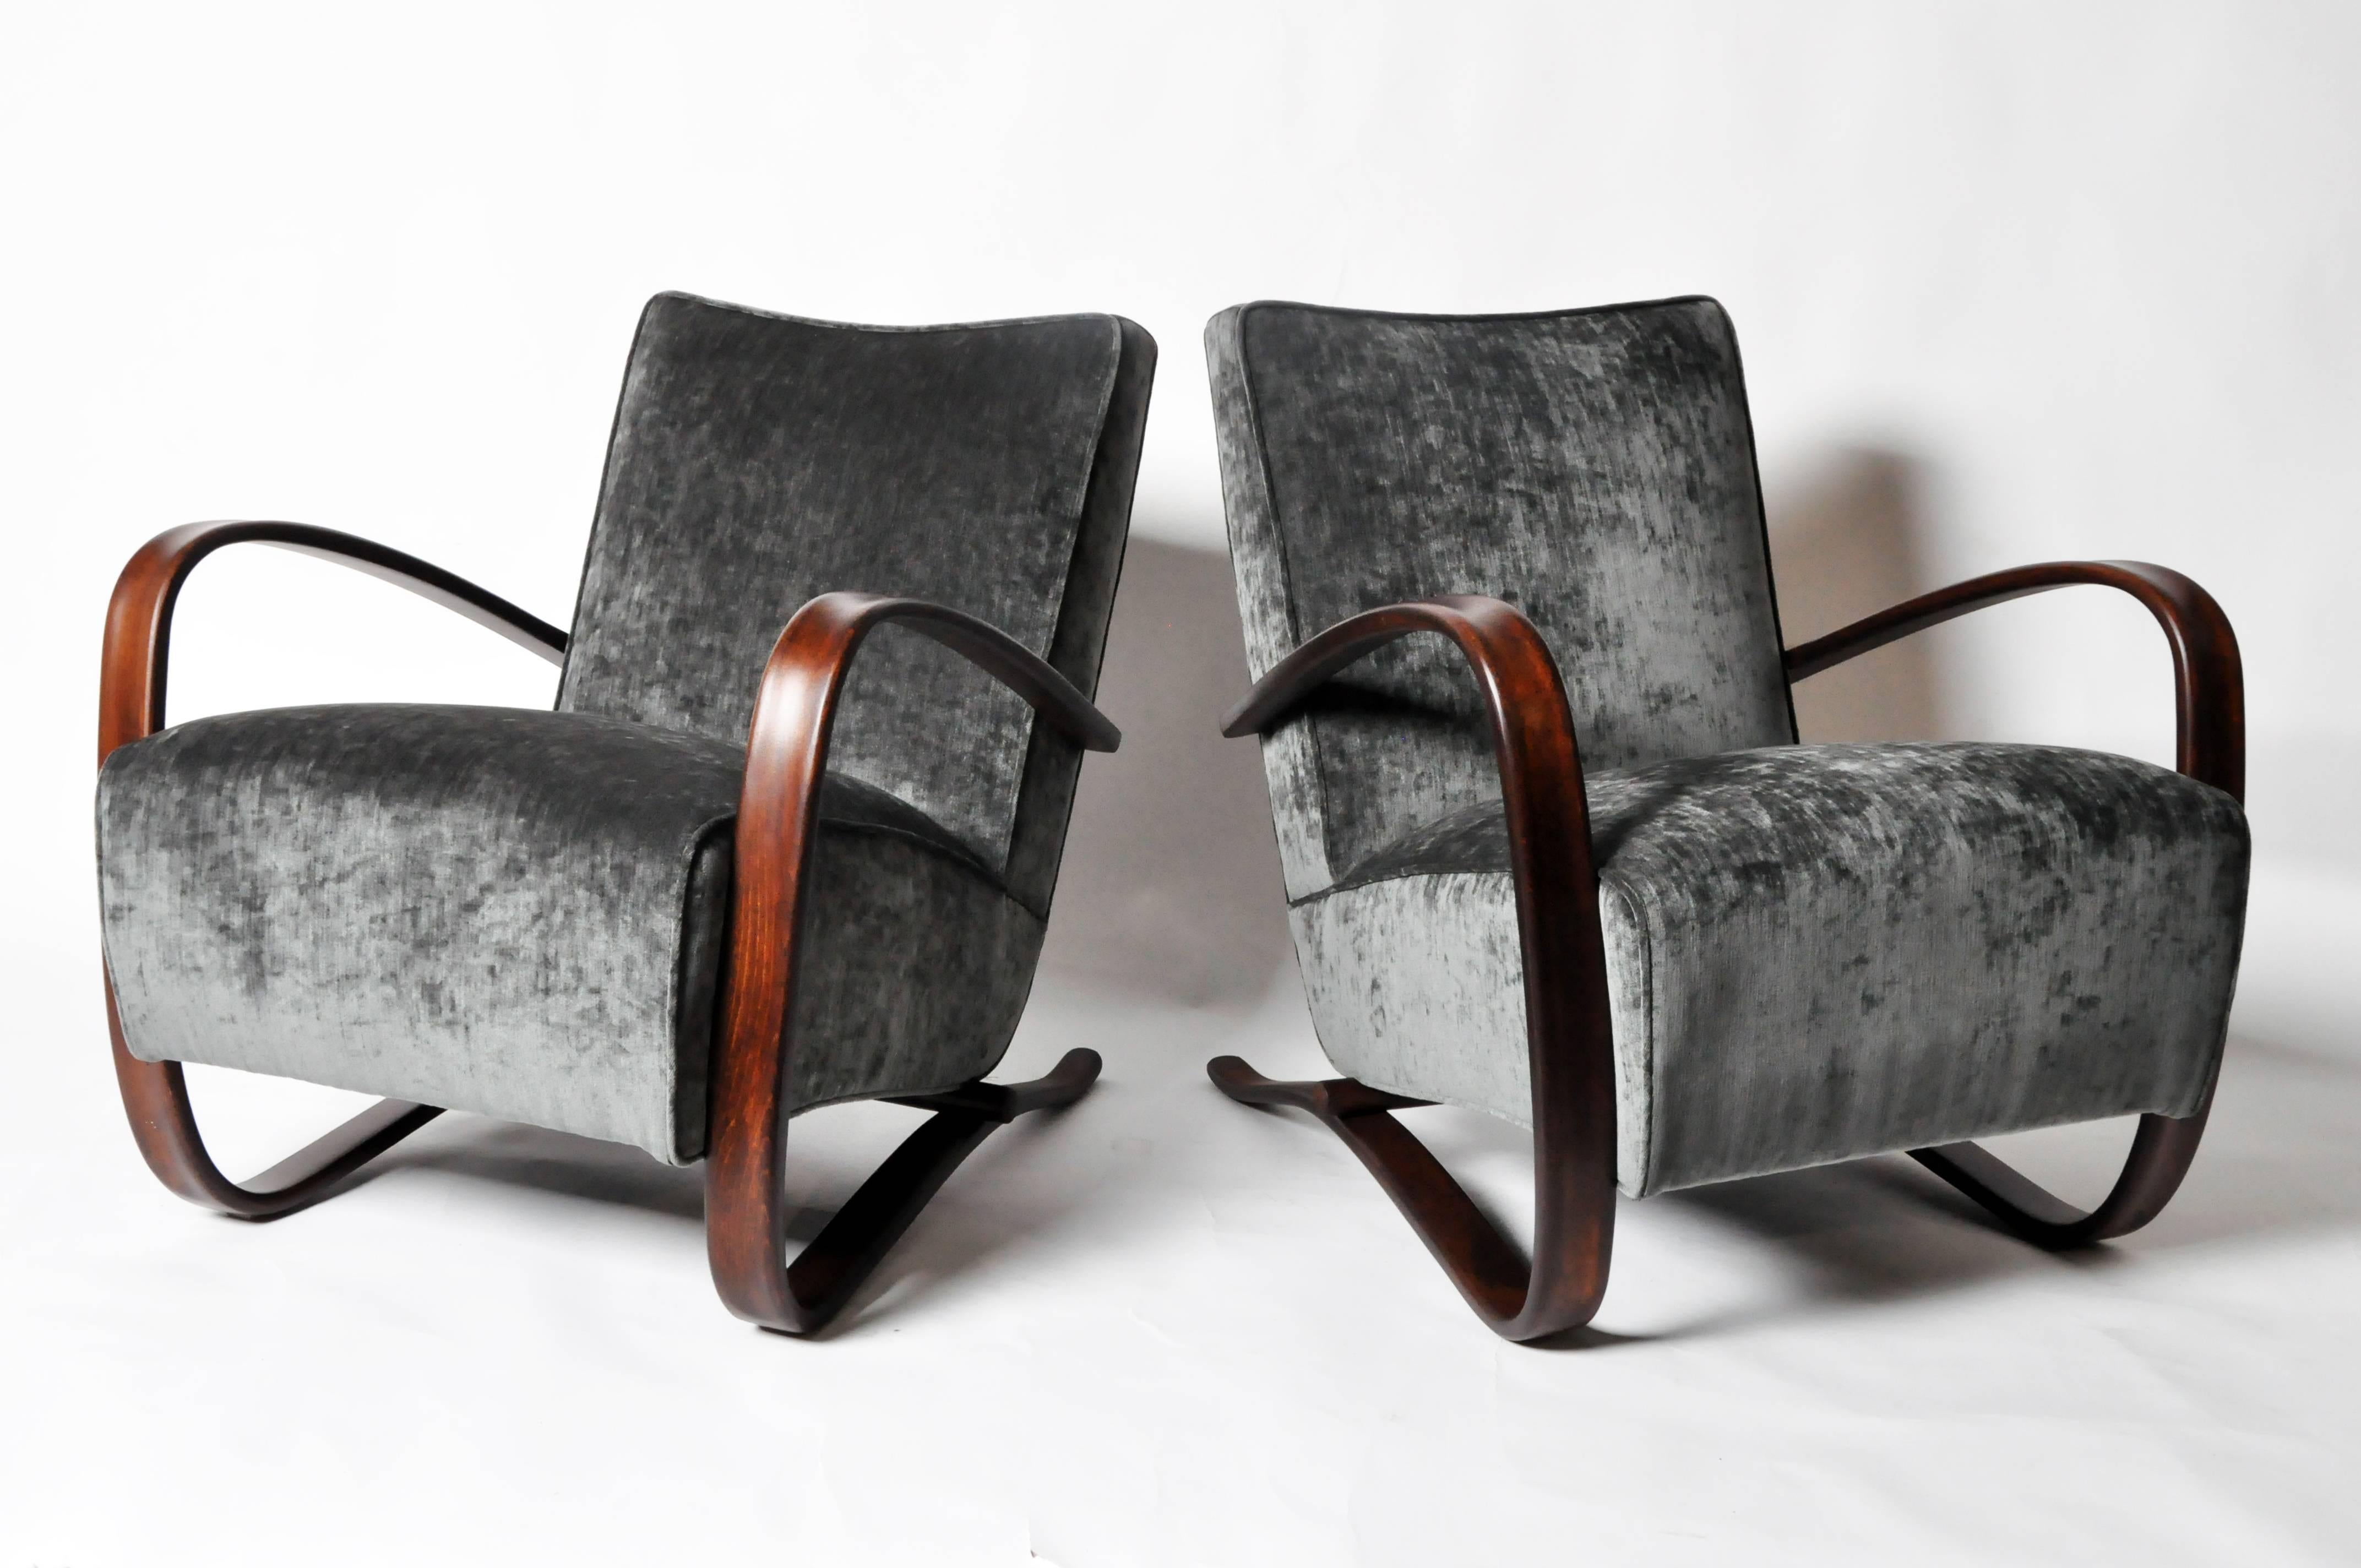 One of the most prominent Czech furniture designers, Jindrich Halabala served as head designer for UP Manufacturing in Brno between 1930 through the mid-1940s. Having designed most of the “H” model furniture his most recognized pieces are armchairs